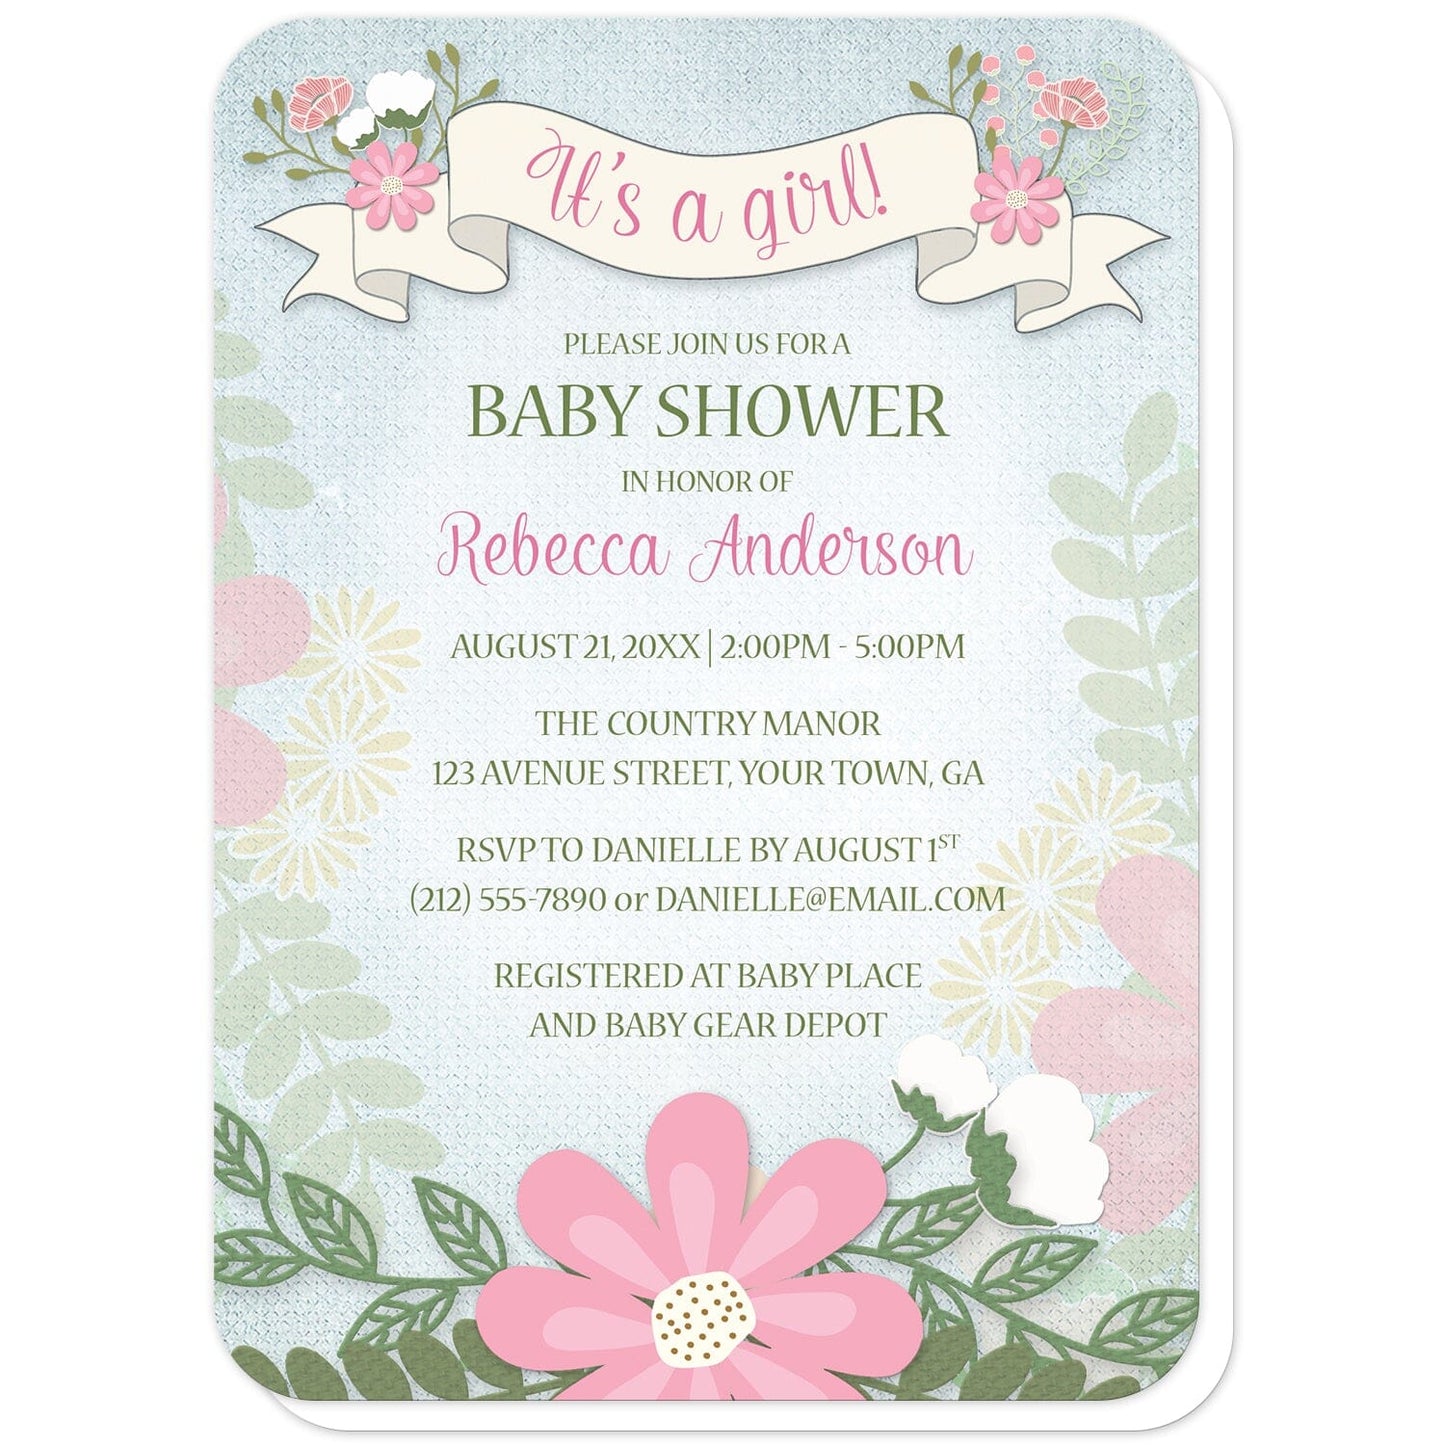 Rustic Floral Southern Girl Baby Shower Invitations (with rounded corners) at Artistically Invited. Rustic floral southern girl baby shower invitations with a flowing floral banner design at the top with "It's a girl!" in pink on the banner. Your personalized baby shower celebration details are custom printed in pink and green over a light blue rustic background with watercolor flowers lightly illustrated on the sides, and a simple floral arrangement along the bottom.